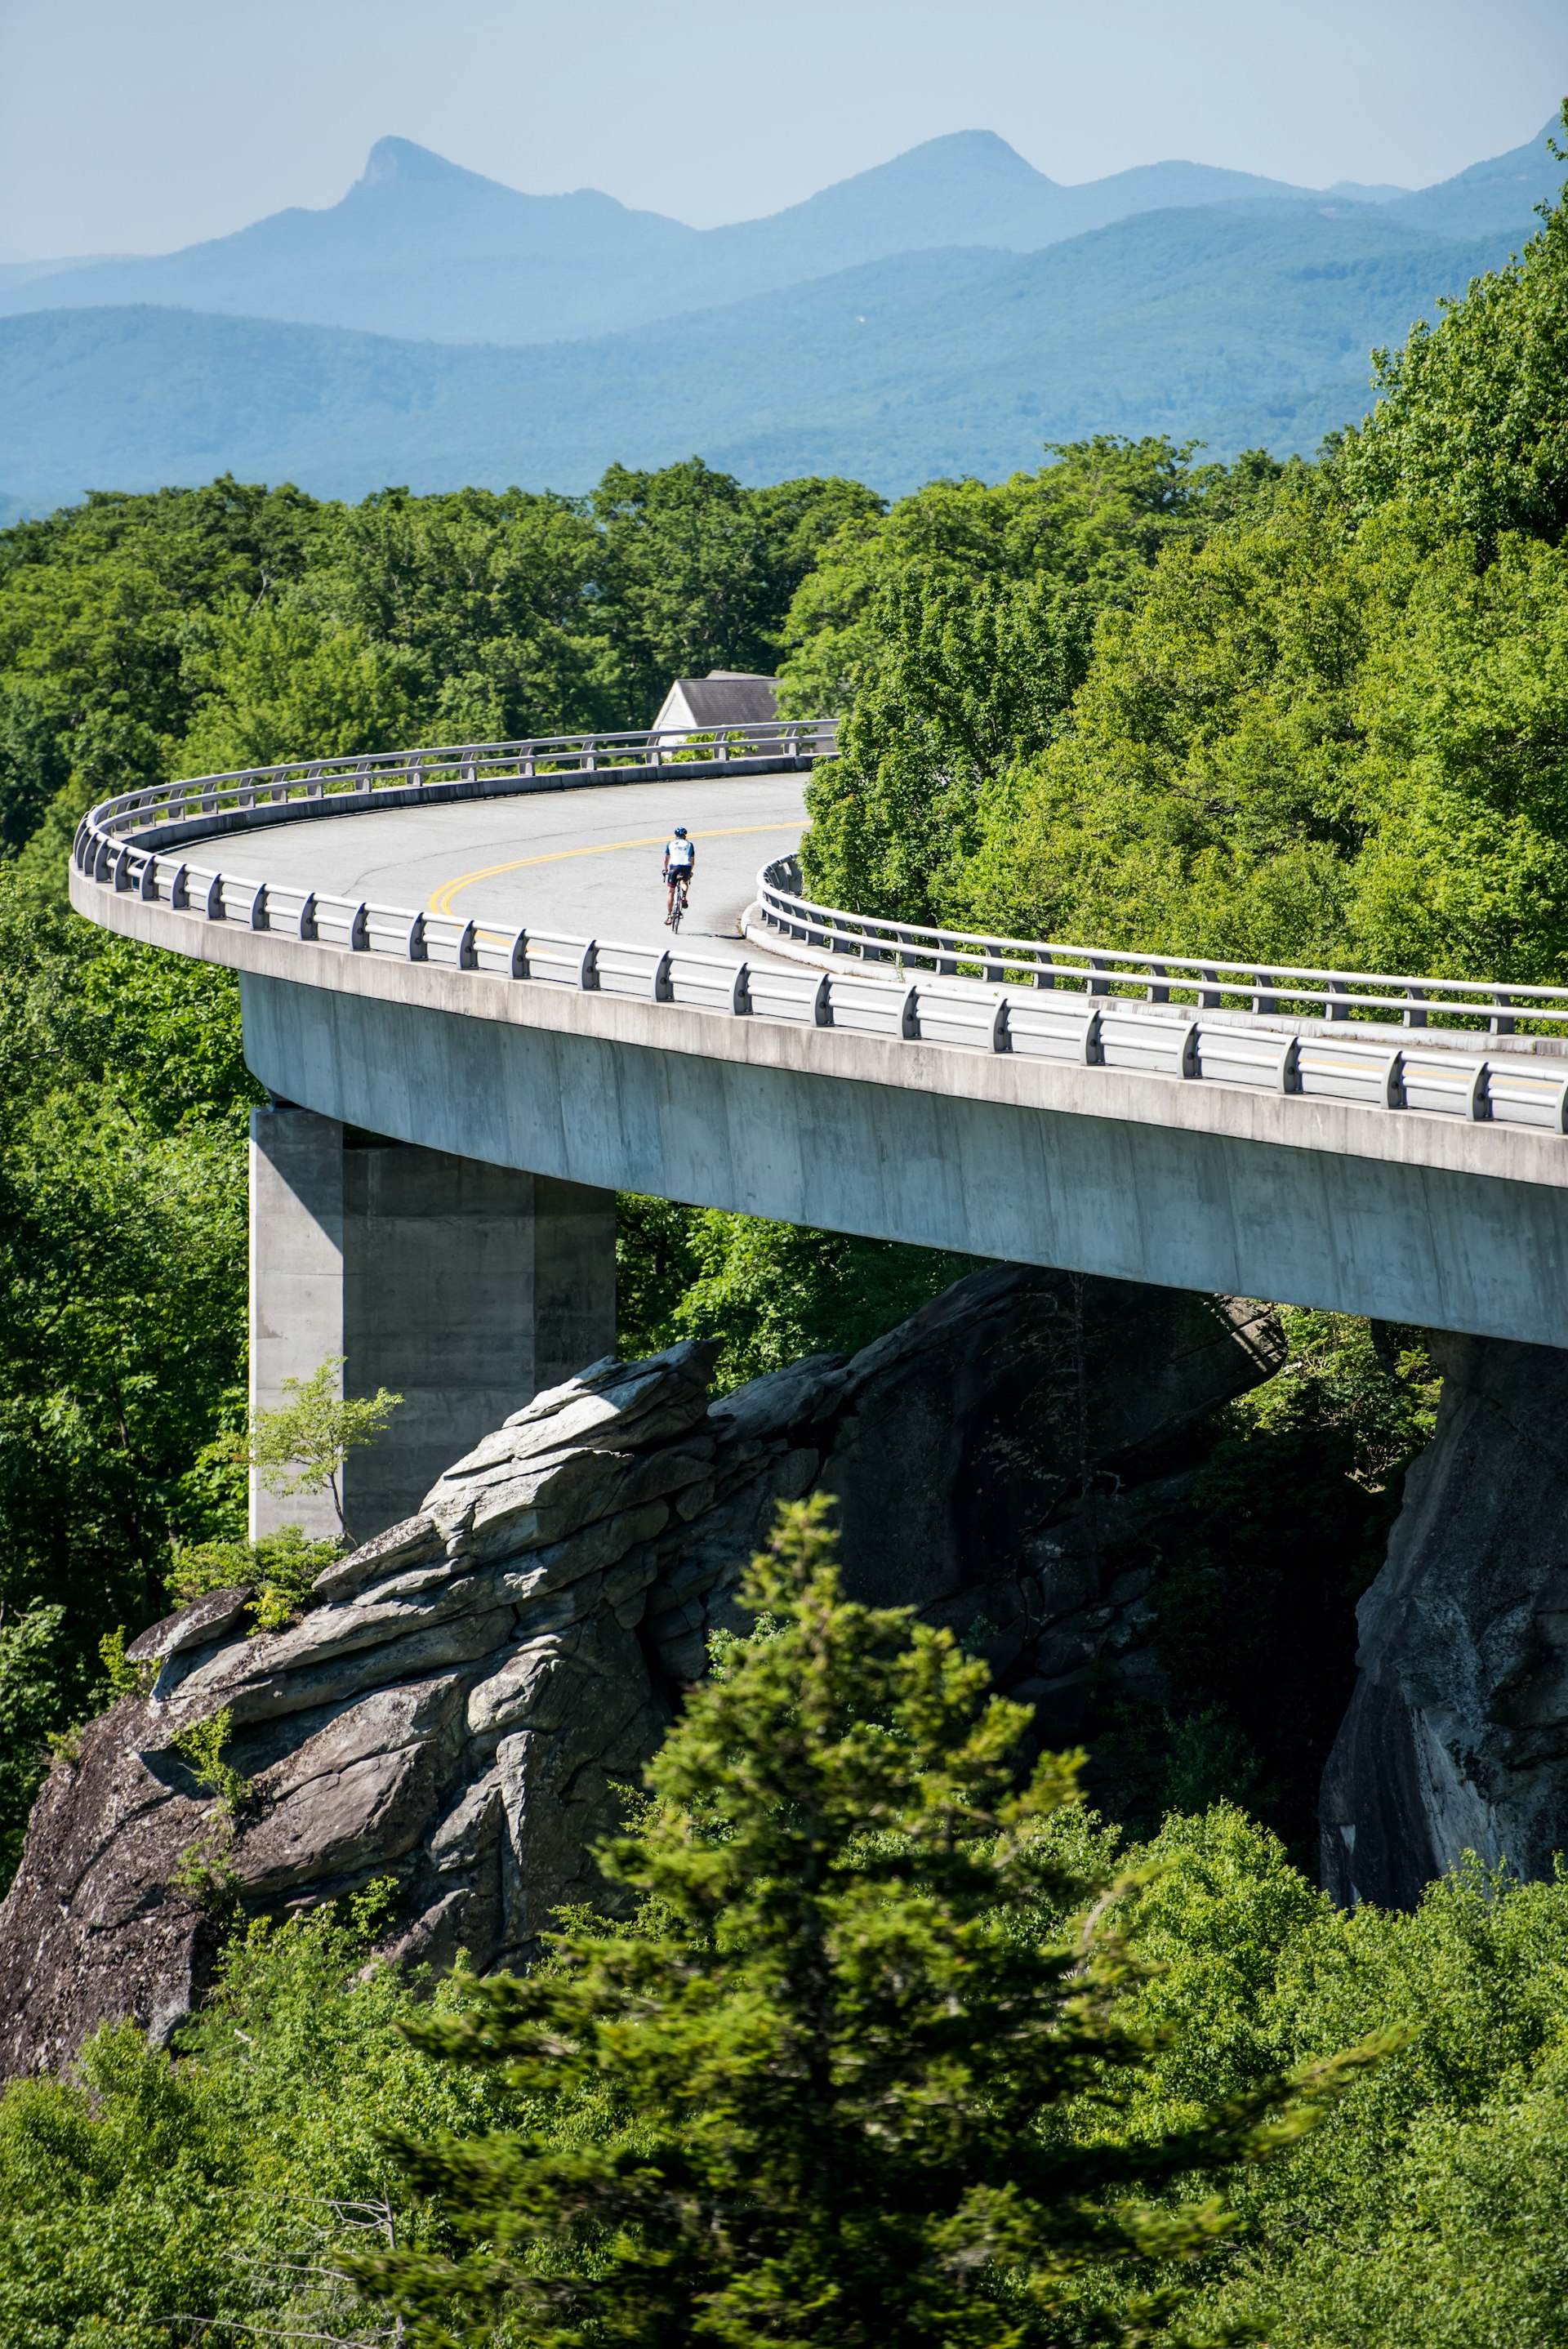 Cycling the Linn Cove Viaduct on the rare quiet summer day along the Blue Ridge Parkway